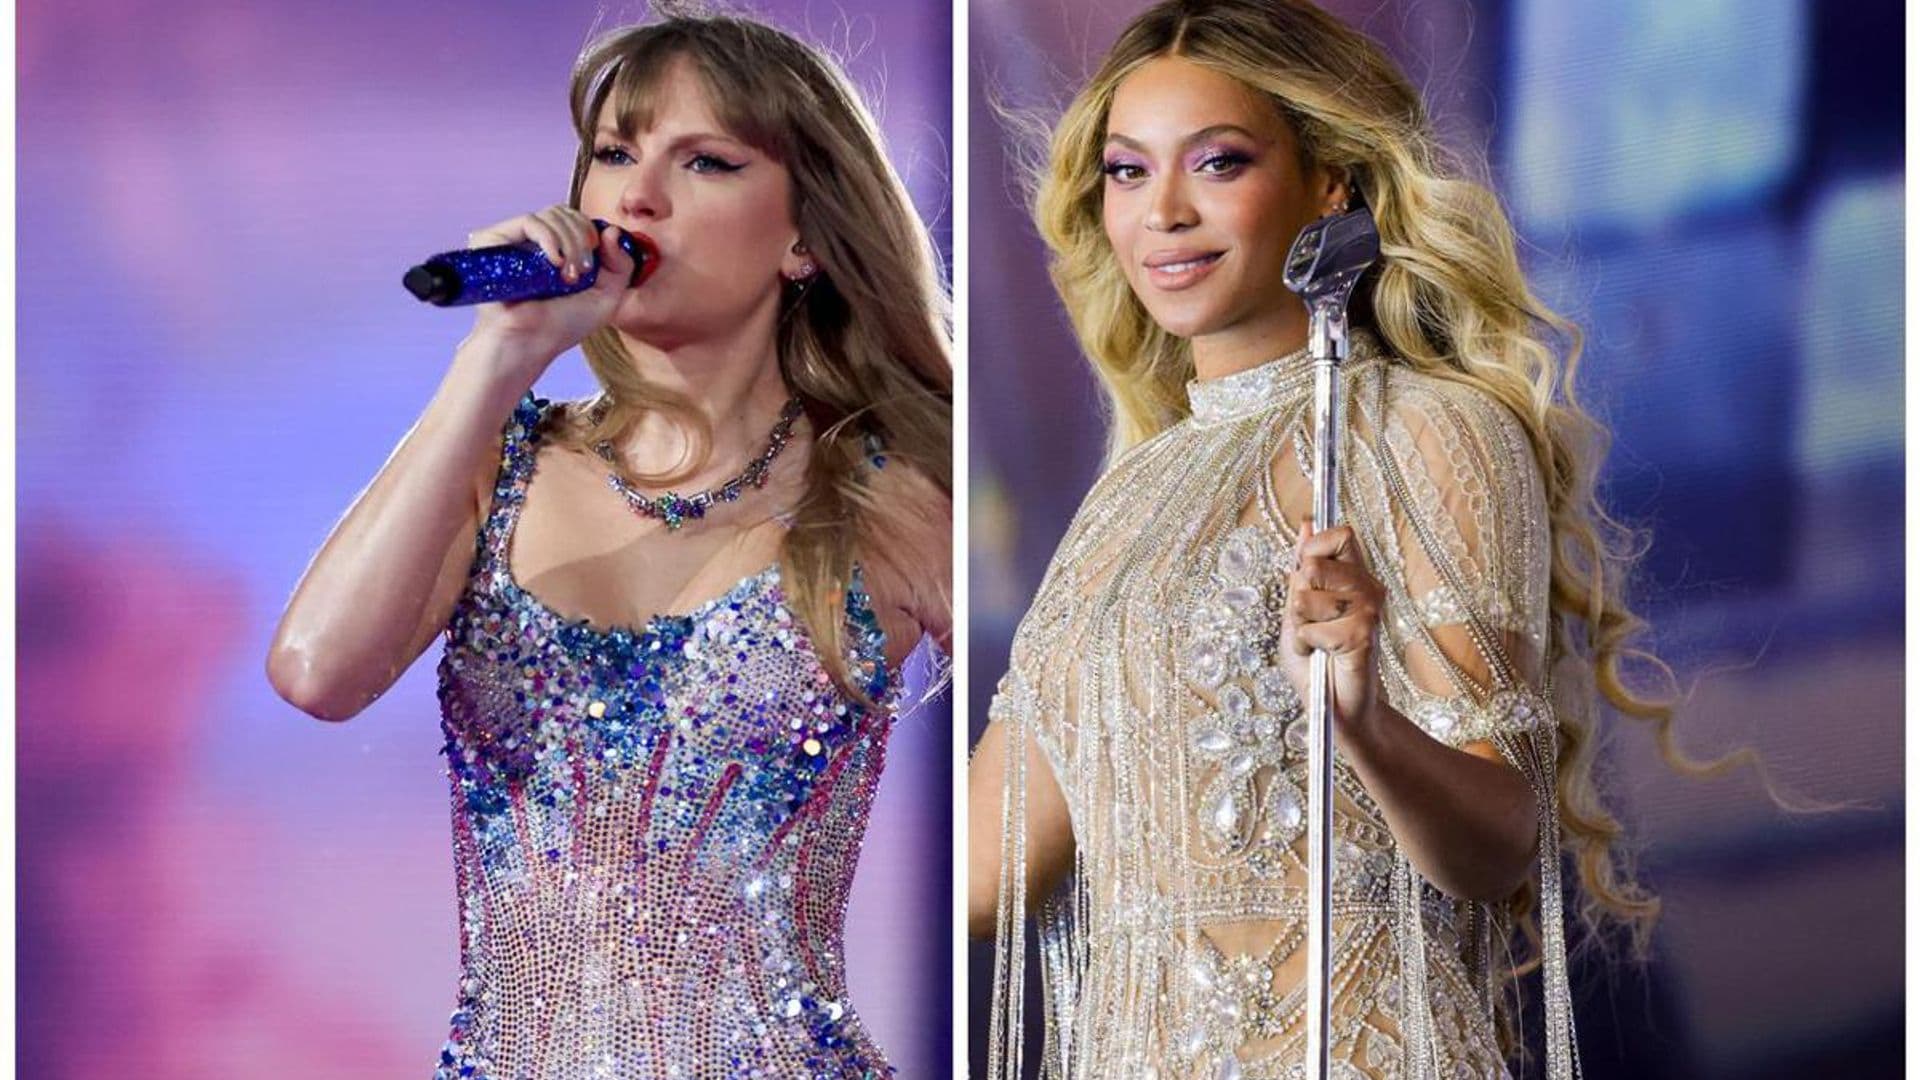 Taylor Swift shares thoughts on Beyoncé comparisons: More about their friendship